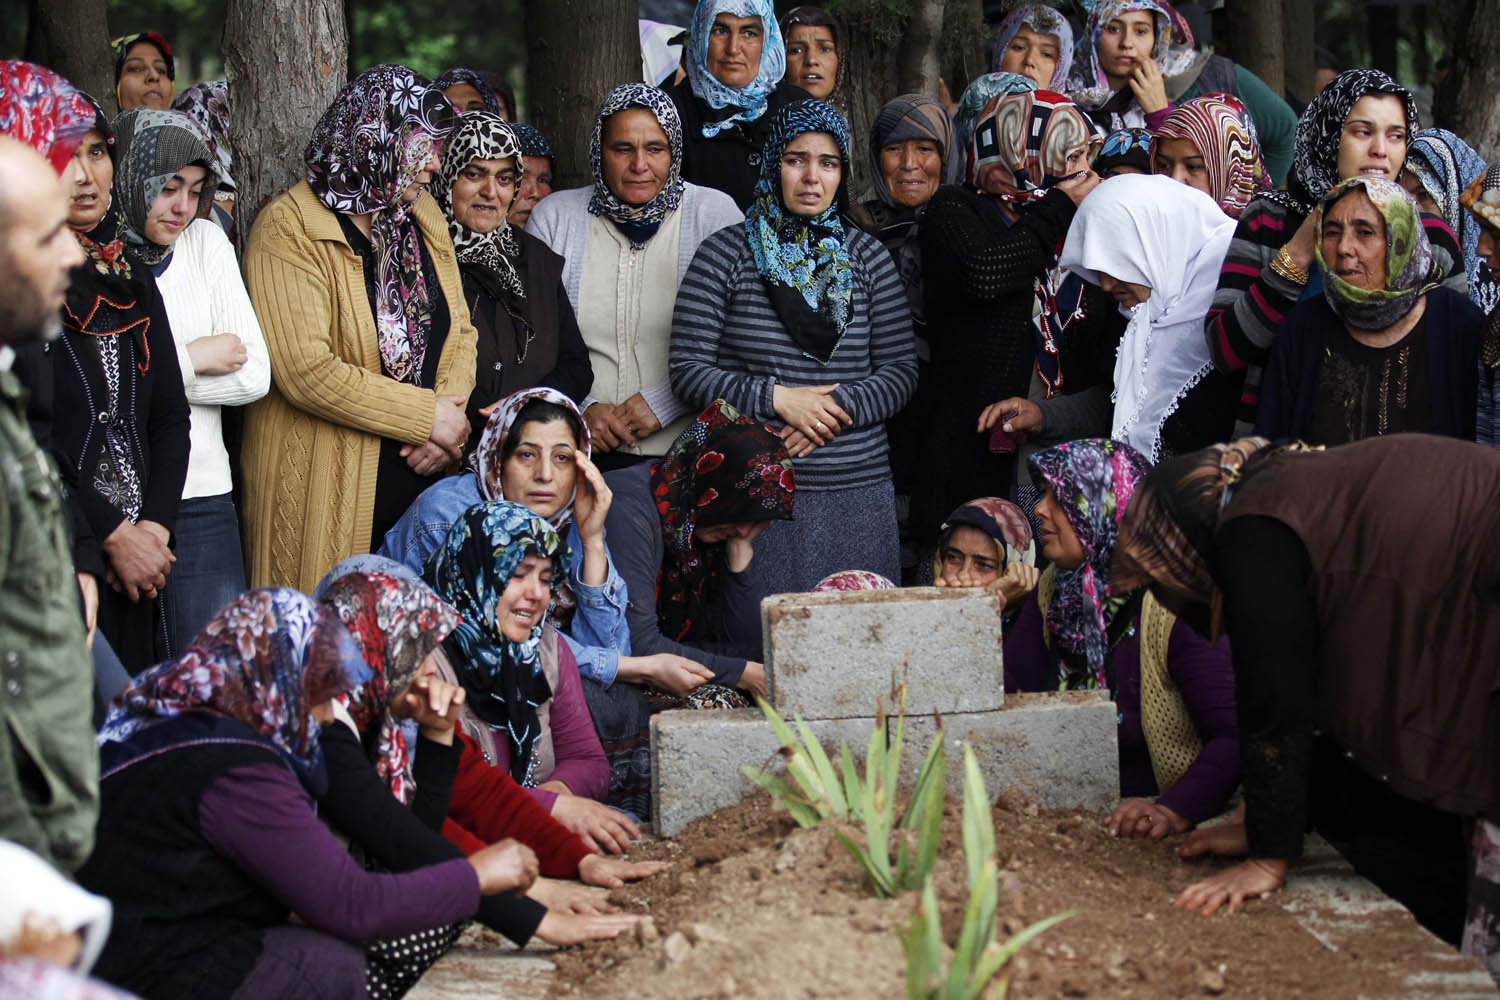 Relatives of Ahmet Uyan and Ahmet Ceyhan who were killed in yesterday's car bombings mourn in the town of Reyhanli of Hatay province near the Turkish-Syrian border